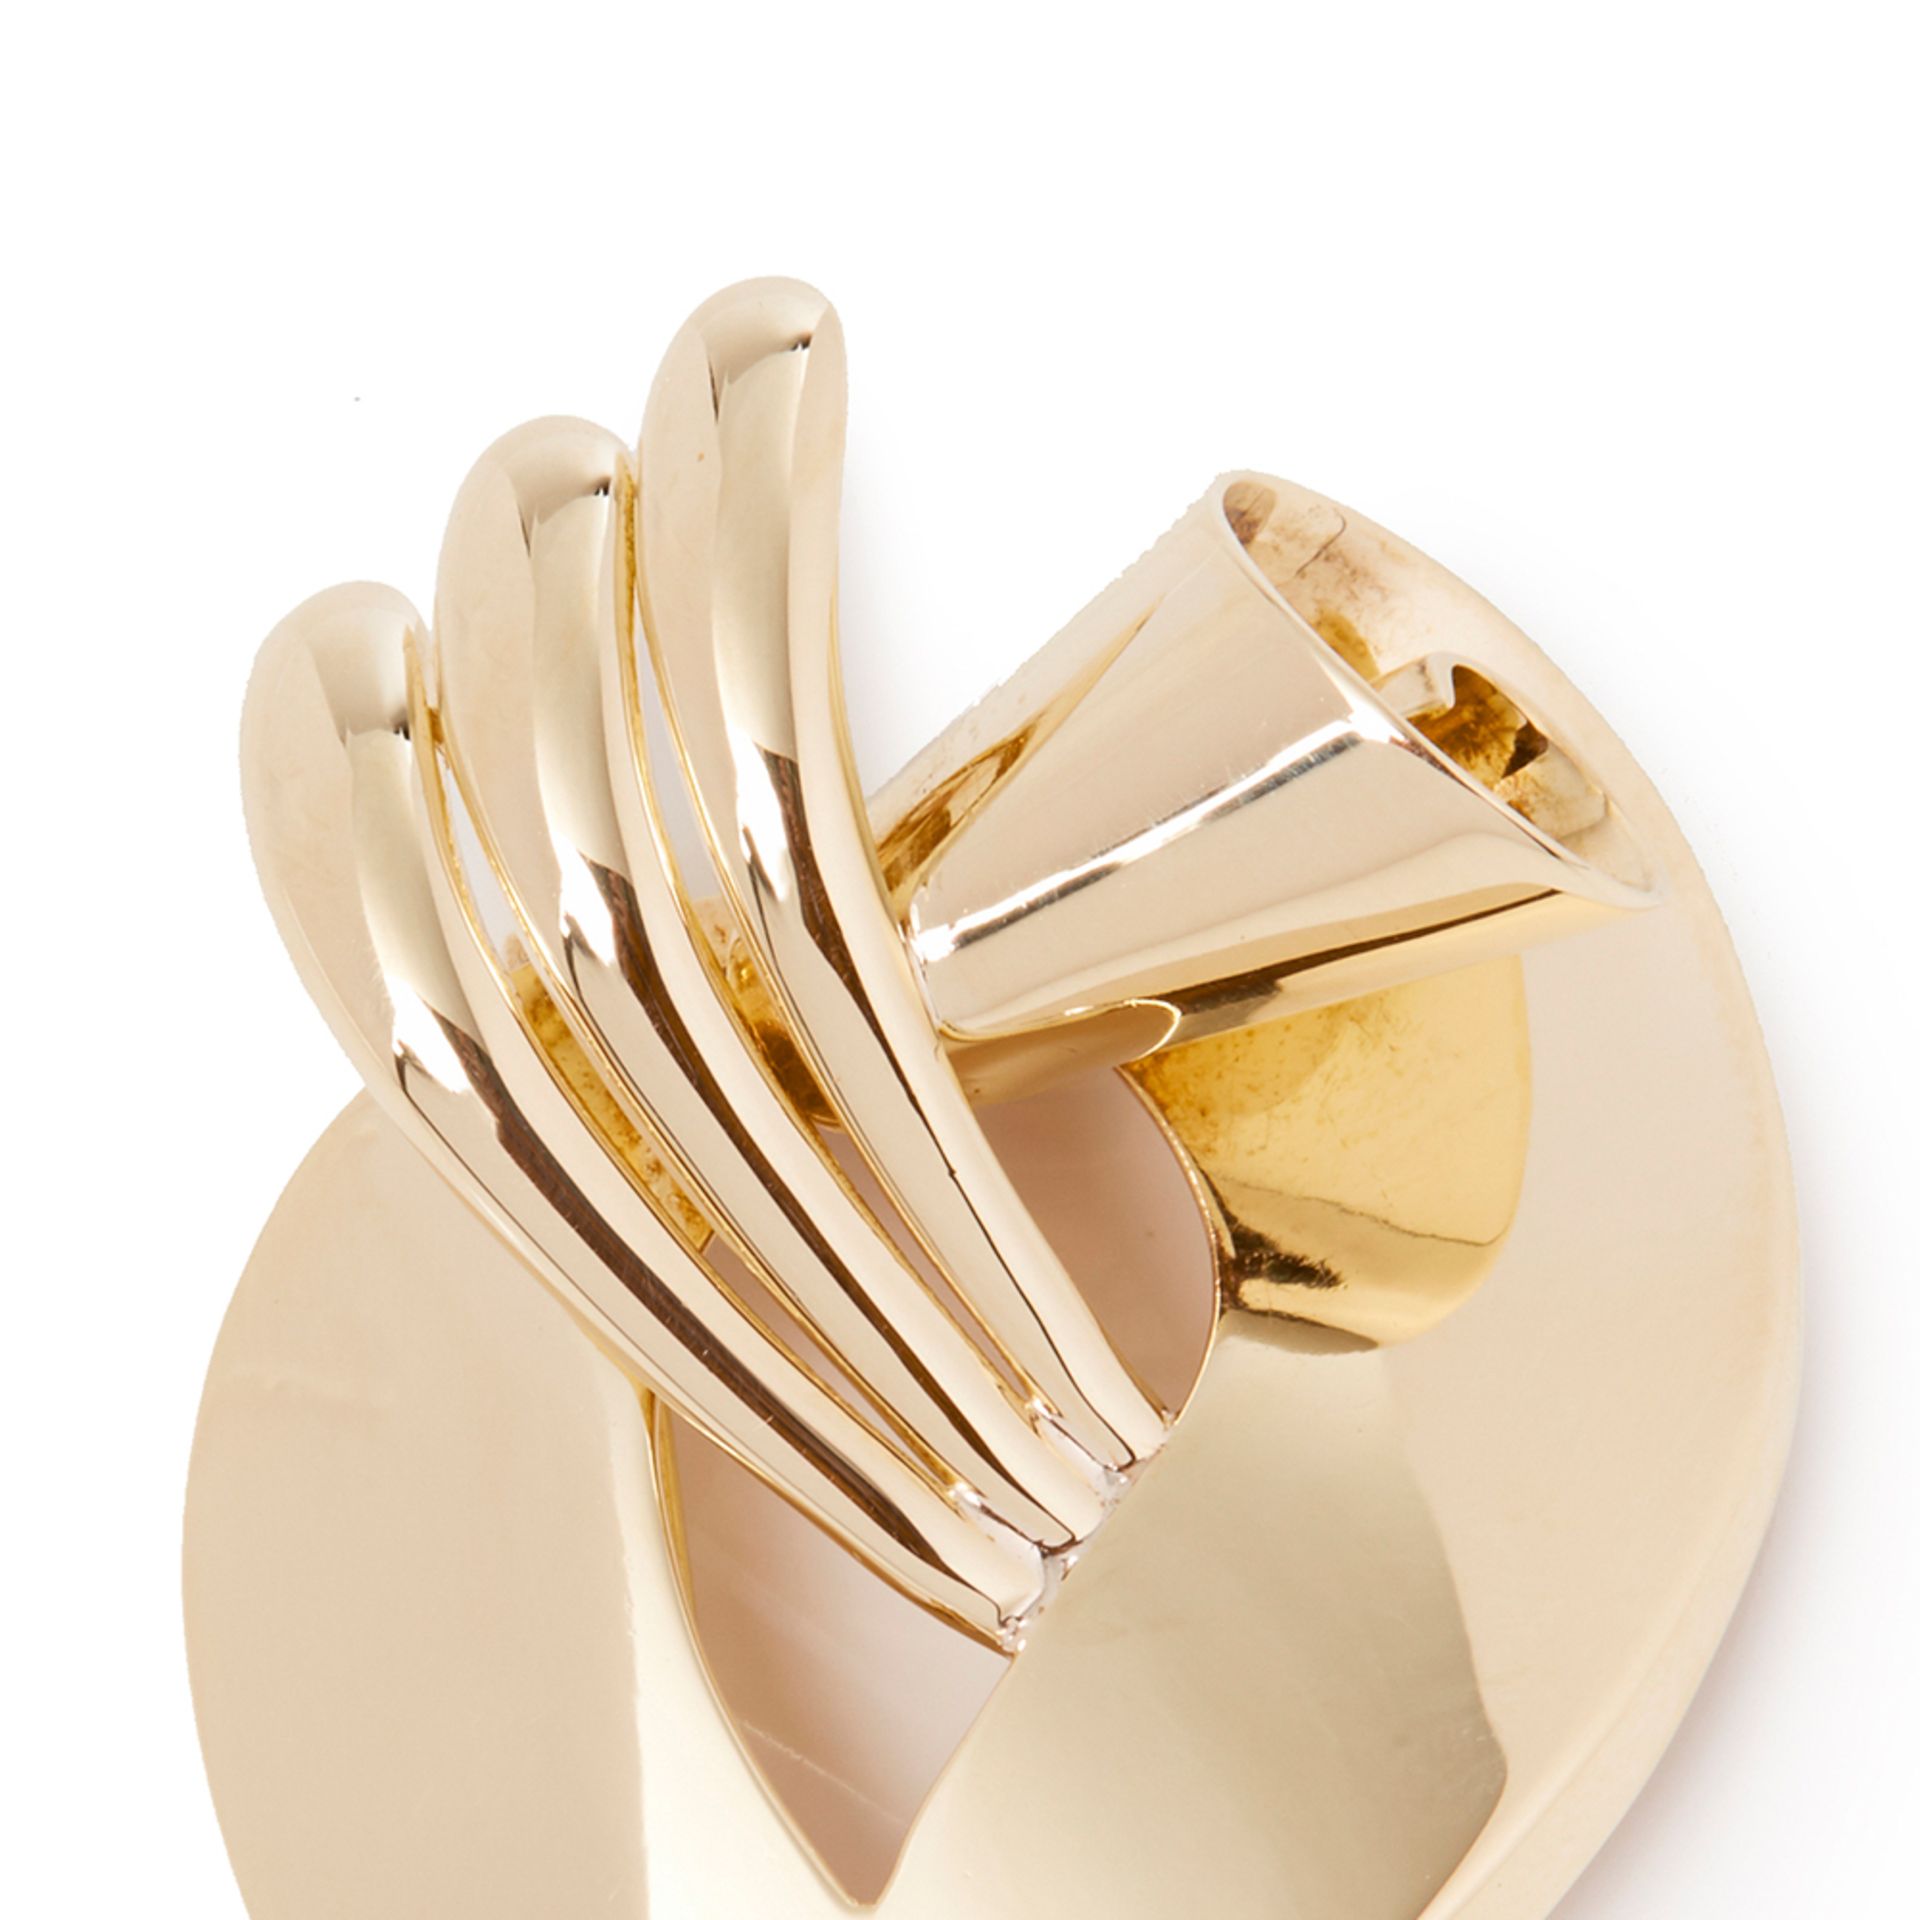 Tiffany & Co. 14k Yellow Gold Brooch - Image 2 of 6